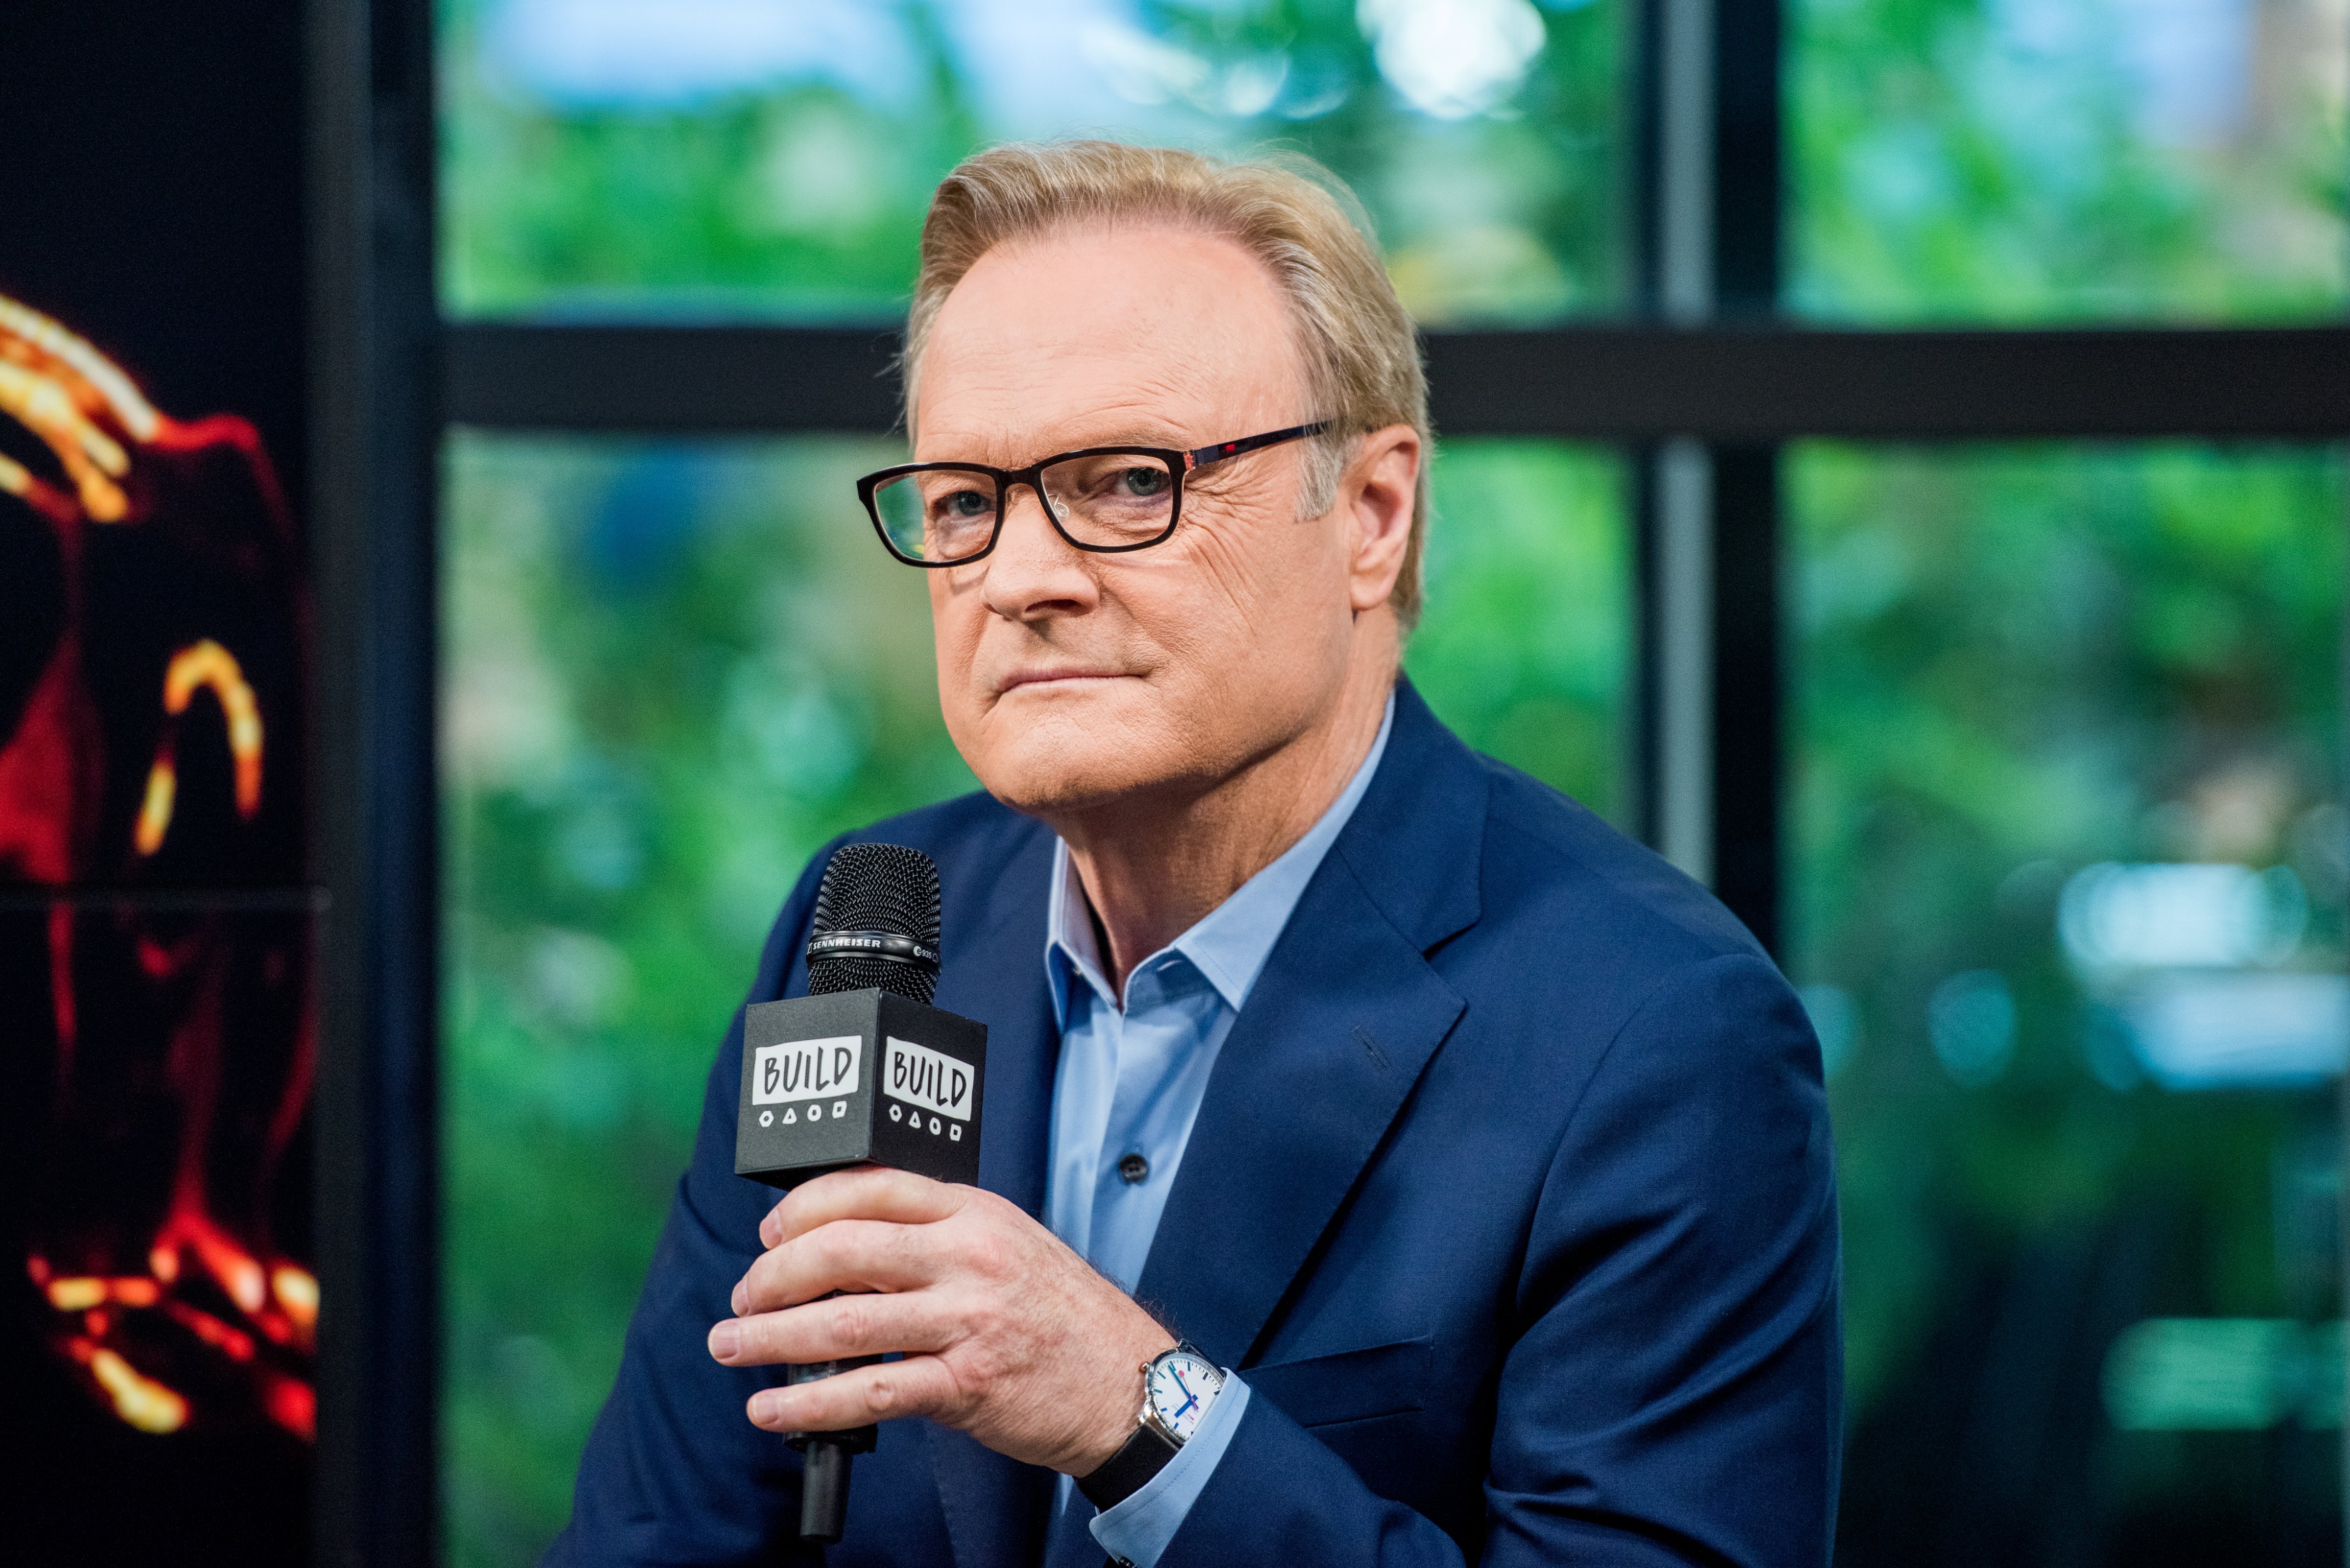 Lawrence O'Donnell discusses "In &amp; Of Itself" with the build series at Build Studio on June 28, 2017. (Roy Rochlin - Getty Images)